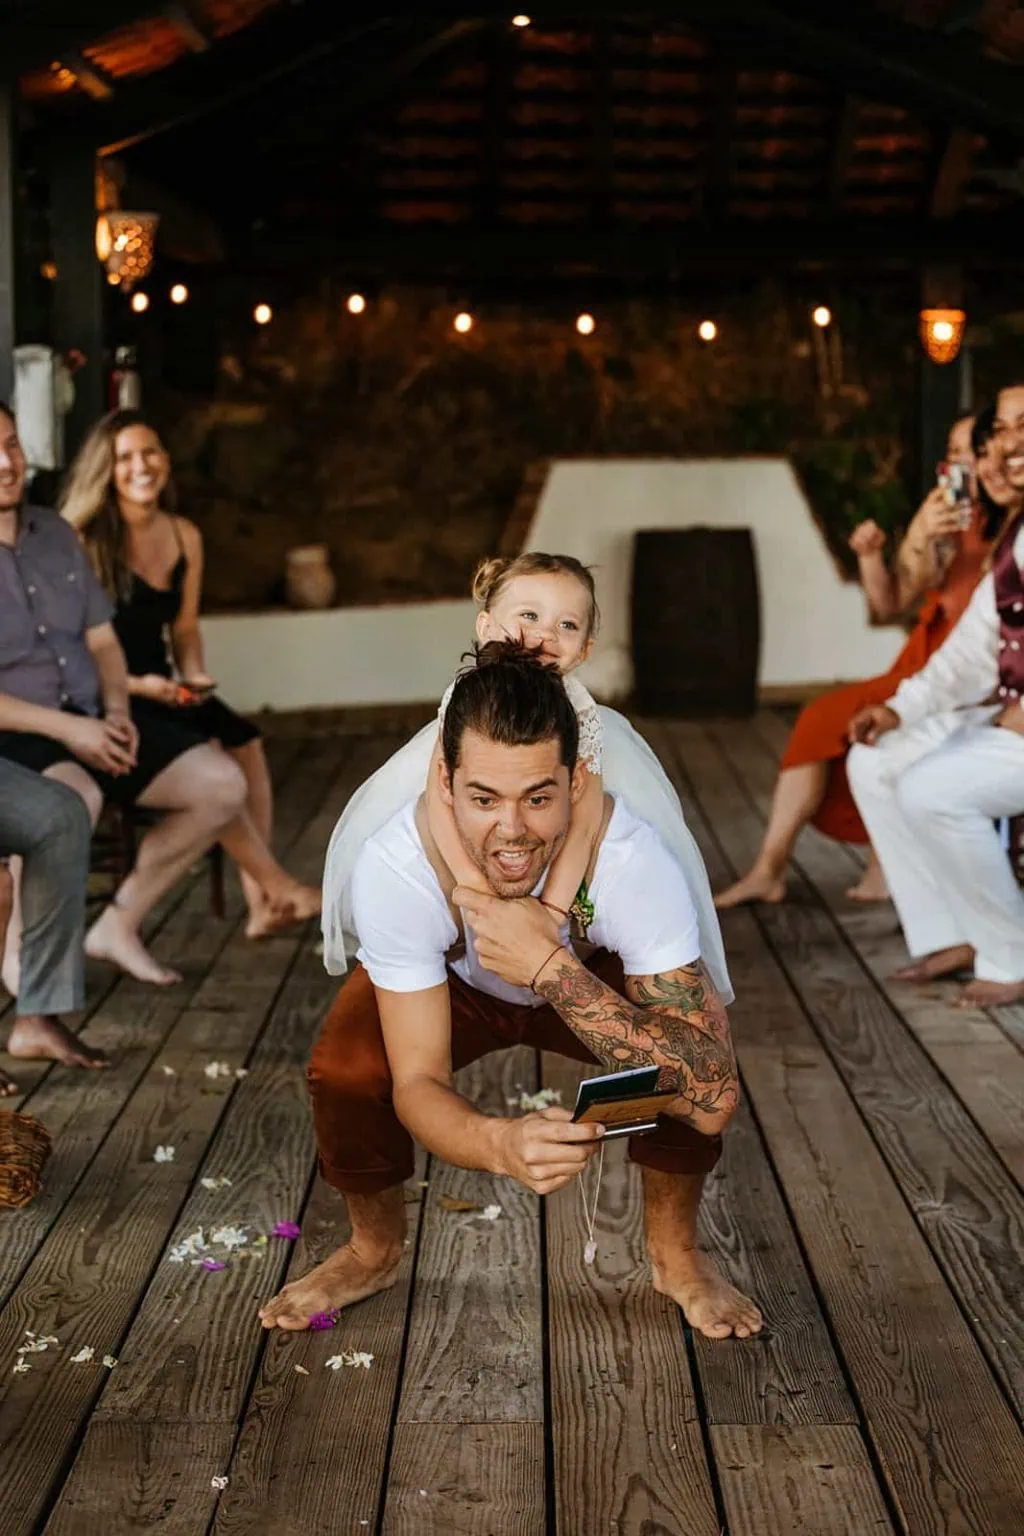 A groom does leap frog with his daughter on his back down the wedding isle.